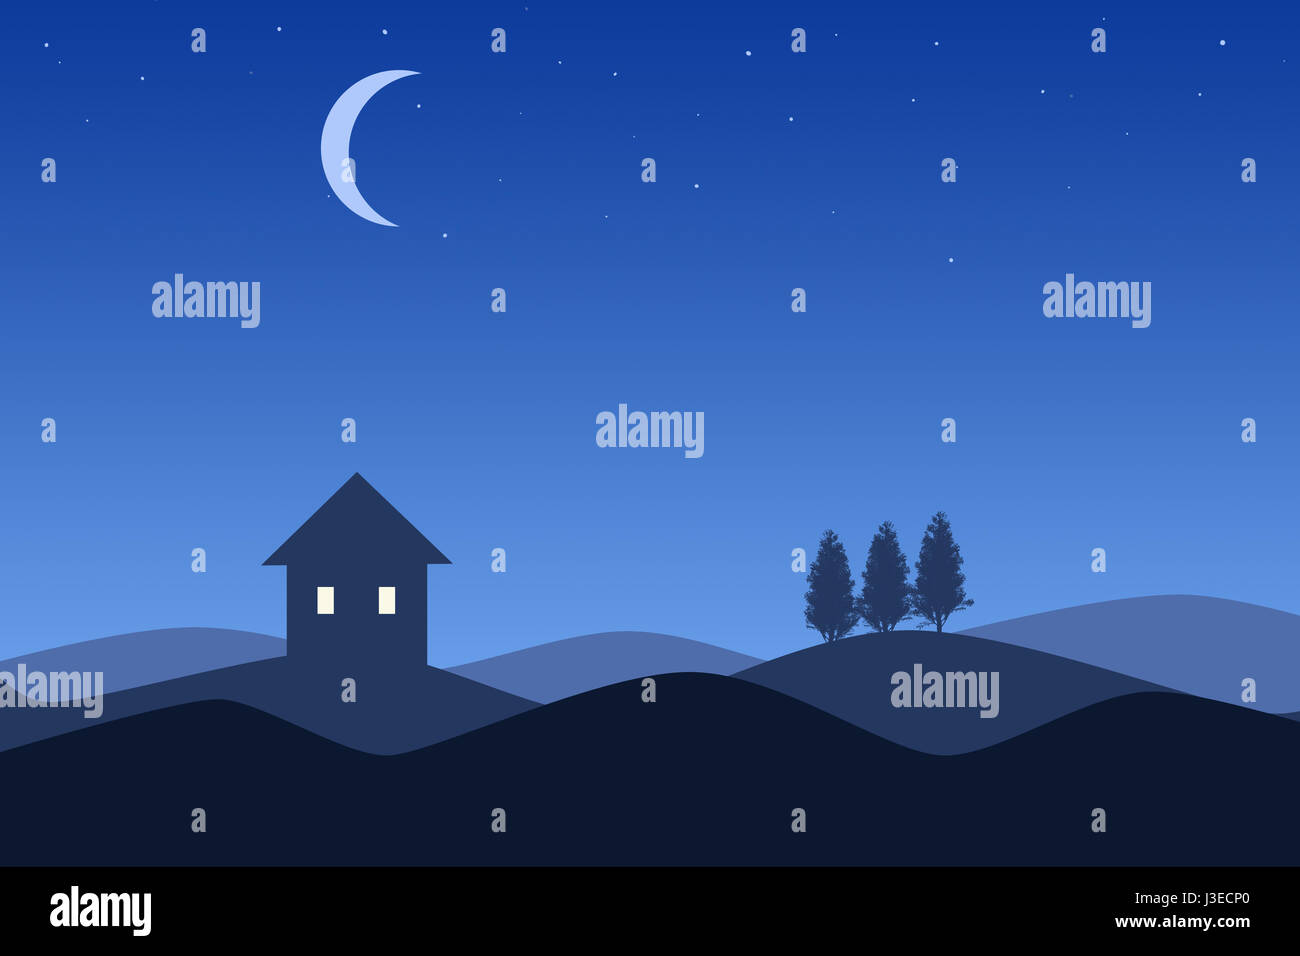 cartoon illlustration of three silhouette houses at night under a blue gradient sky and moon. Stock Photo